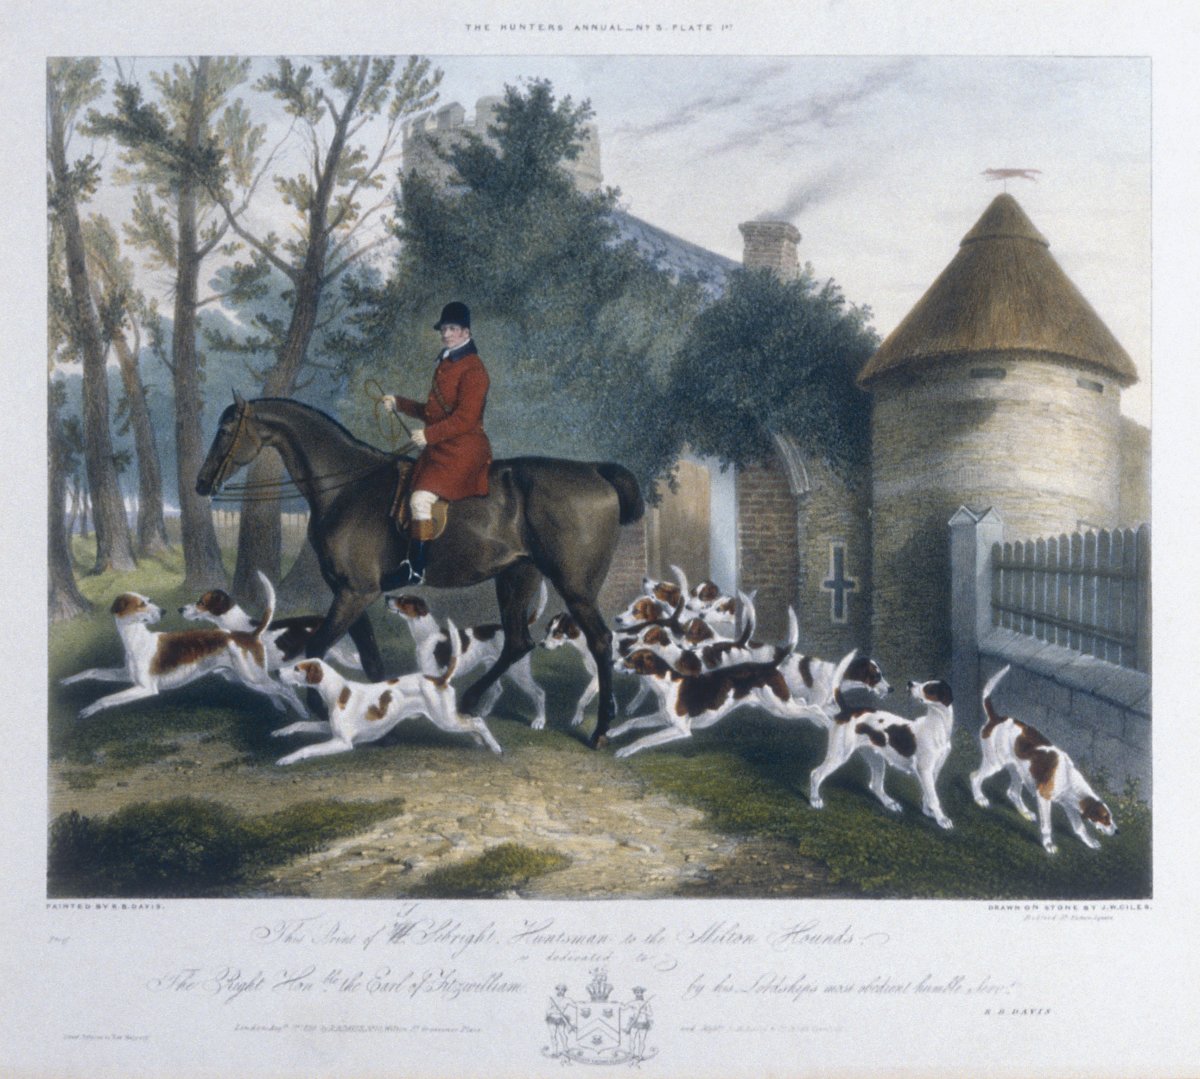 Image of No.3, Plate 1: W. Sebright, Huntsman to the Milton Hounds